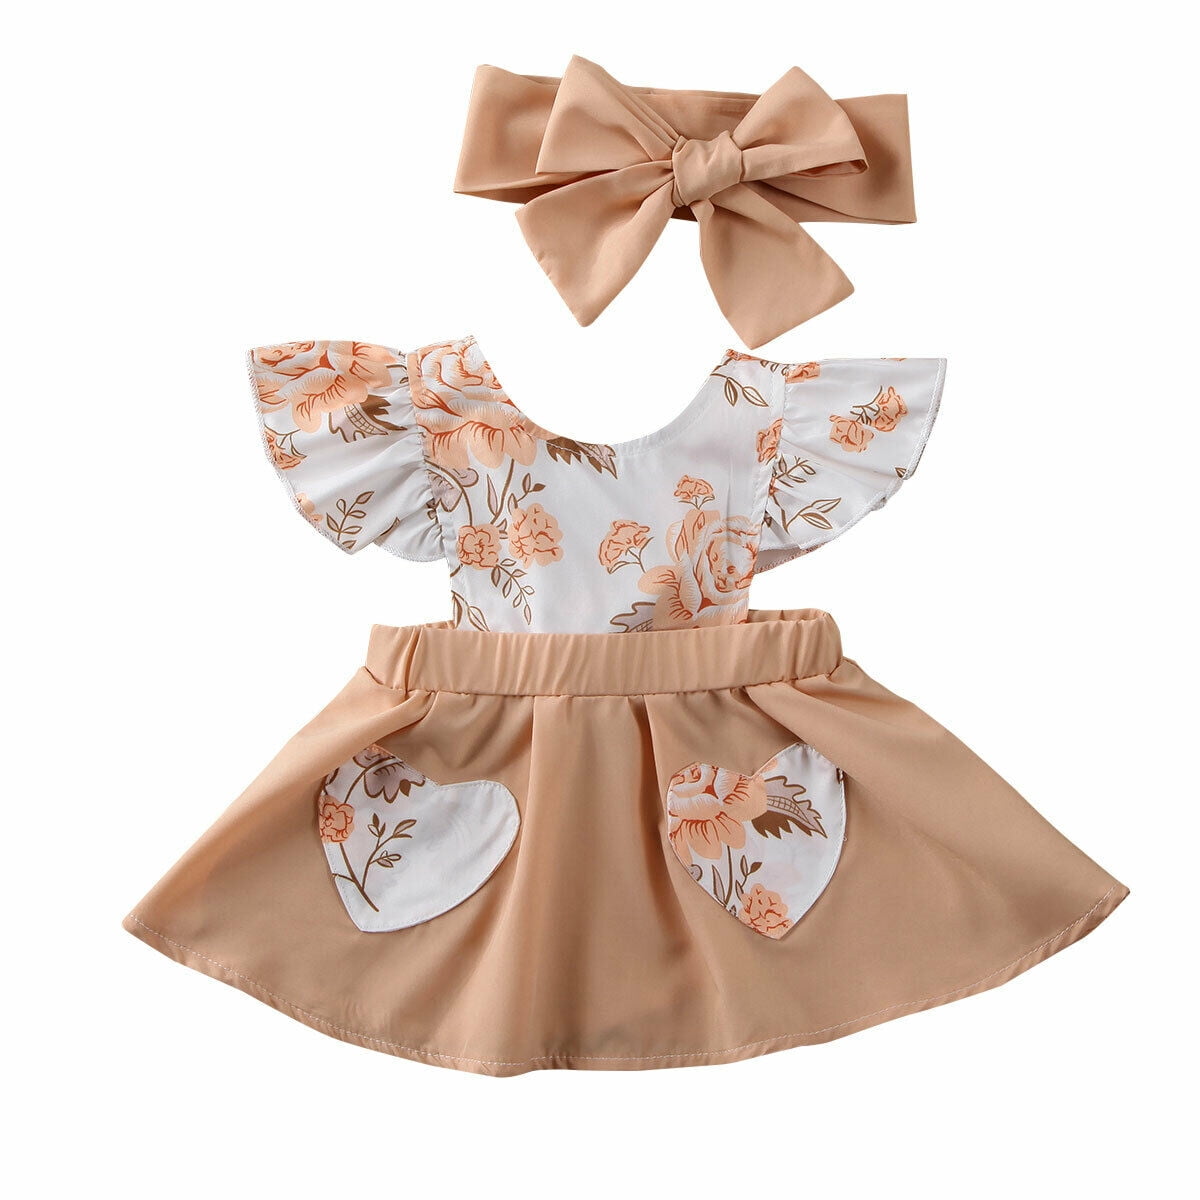 New Baby Girls Pale Yellow Floral Cotton Party Dress From 3-6 to 12-18 Months 